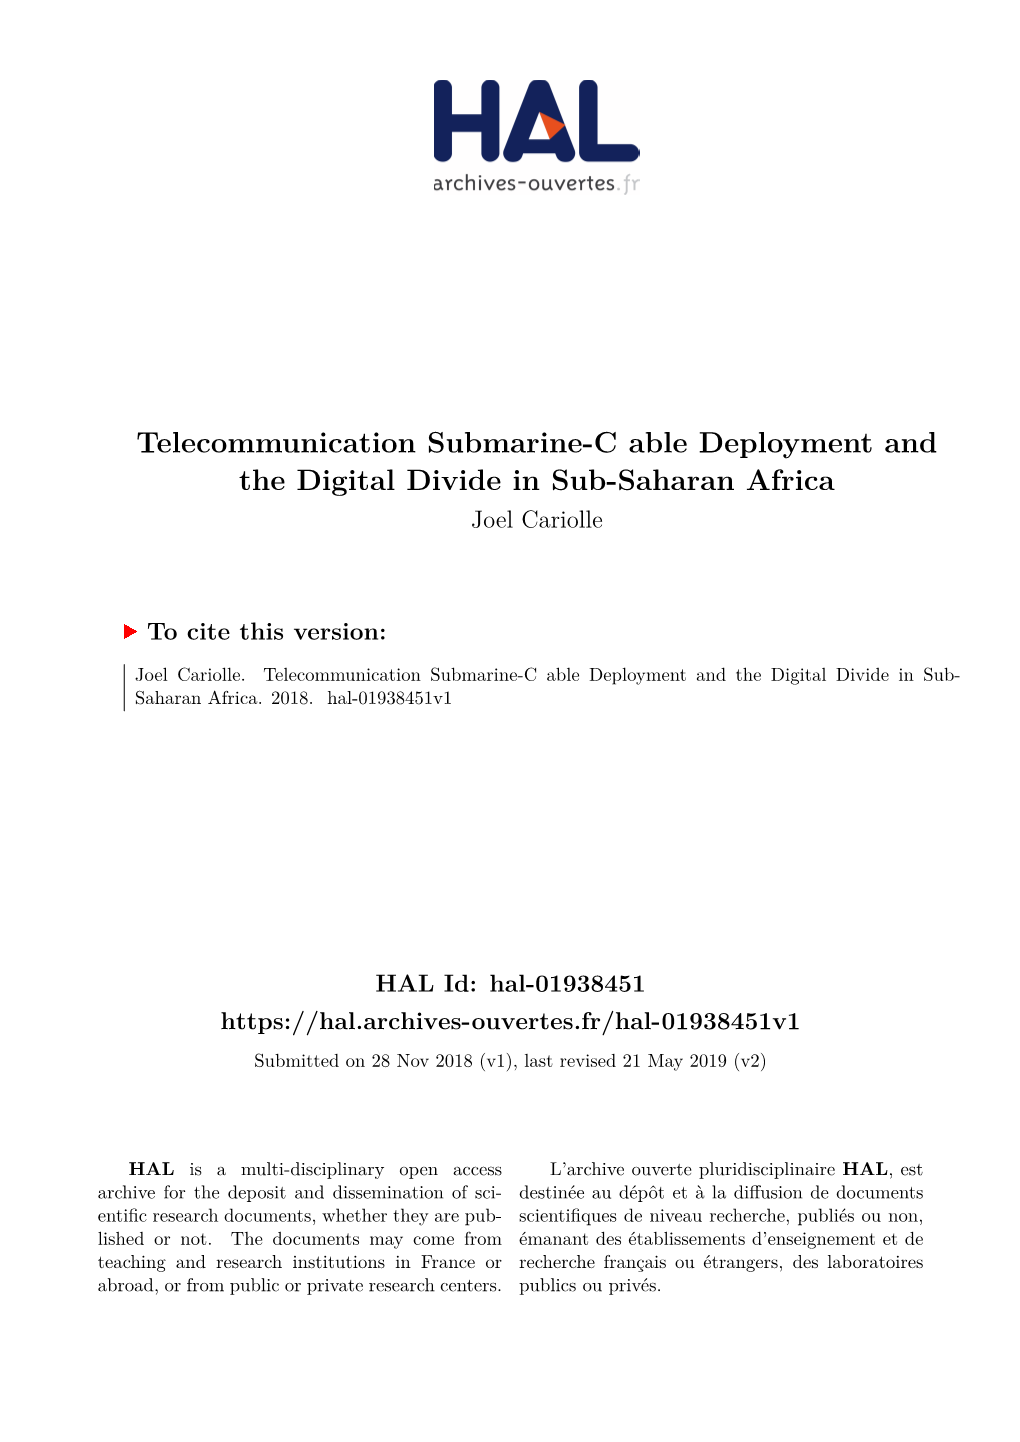 Telecommunication Submarine-C Able Deployment and the Digital Divide in Sub-Saharan Africa Joel Cariolle